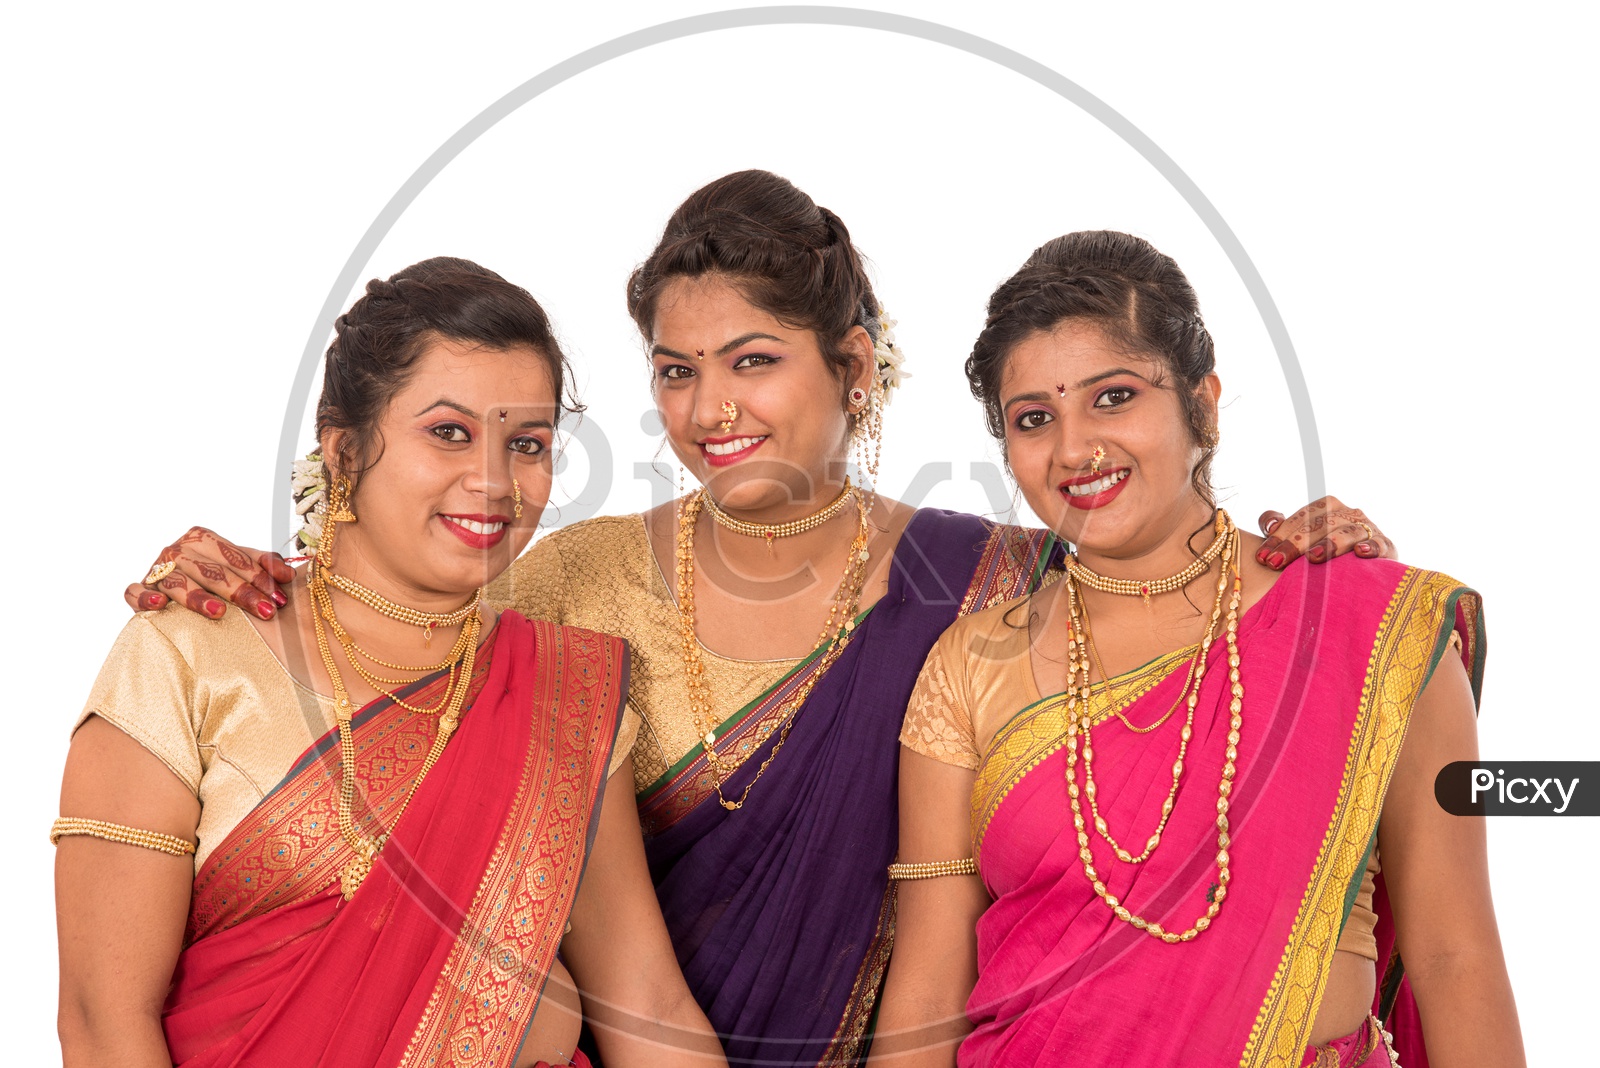 Portrait Of a Young Traditional Marathi Woman Wearing an Elegant Sari And Posing With Smile Face And With Expression  On an Isolated White Background